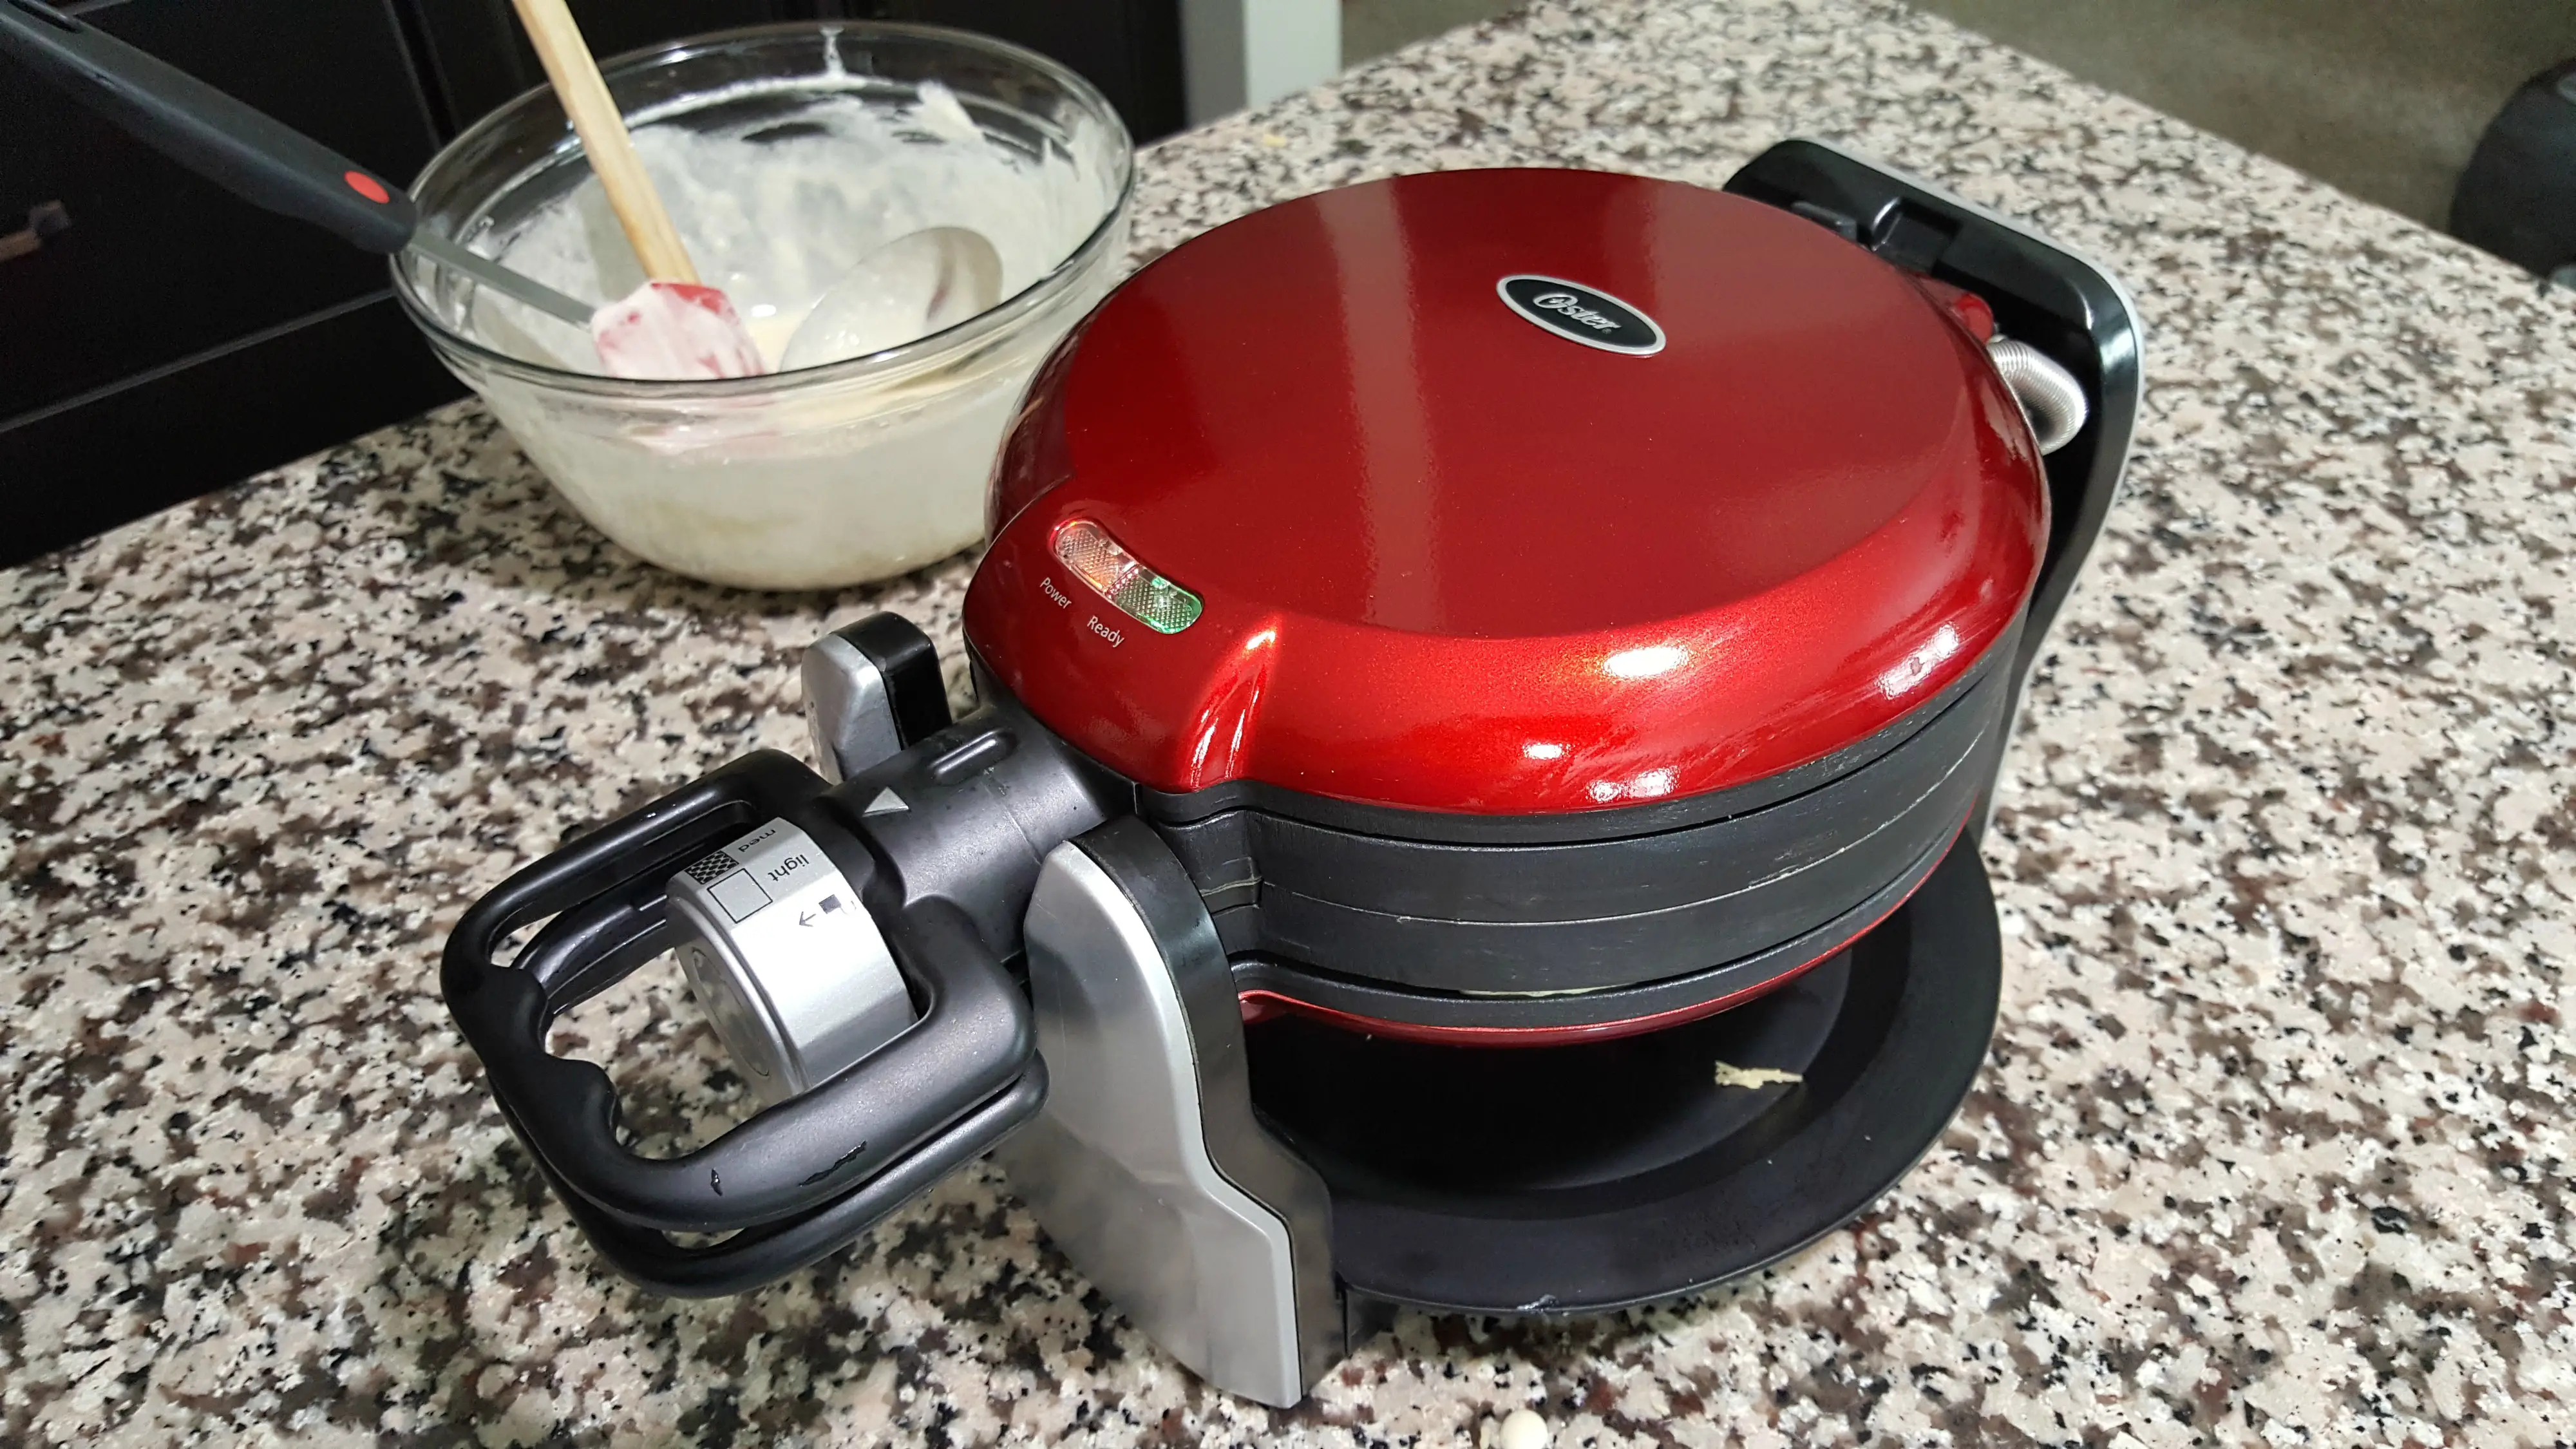 a double-sided waffle maker and waffle batter.